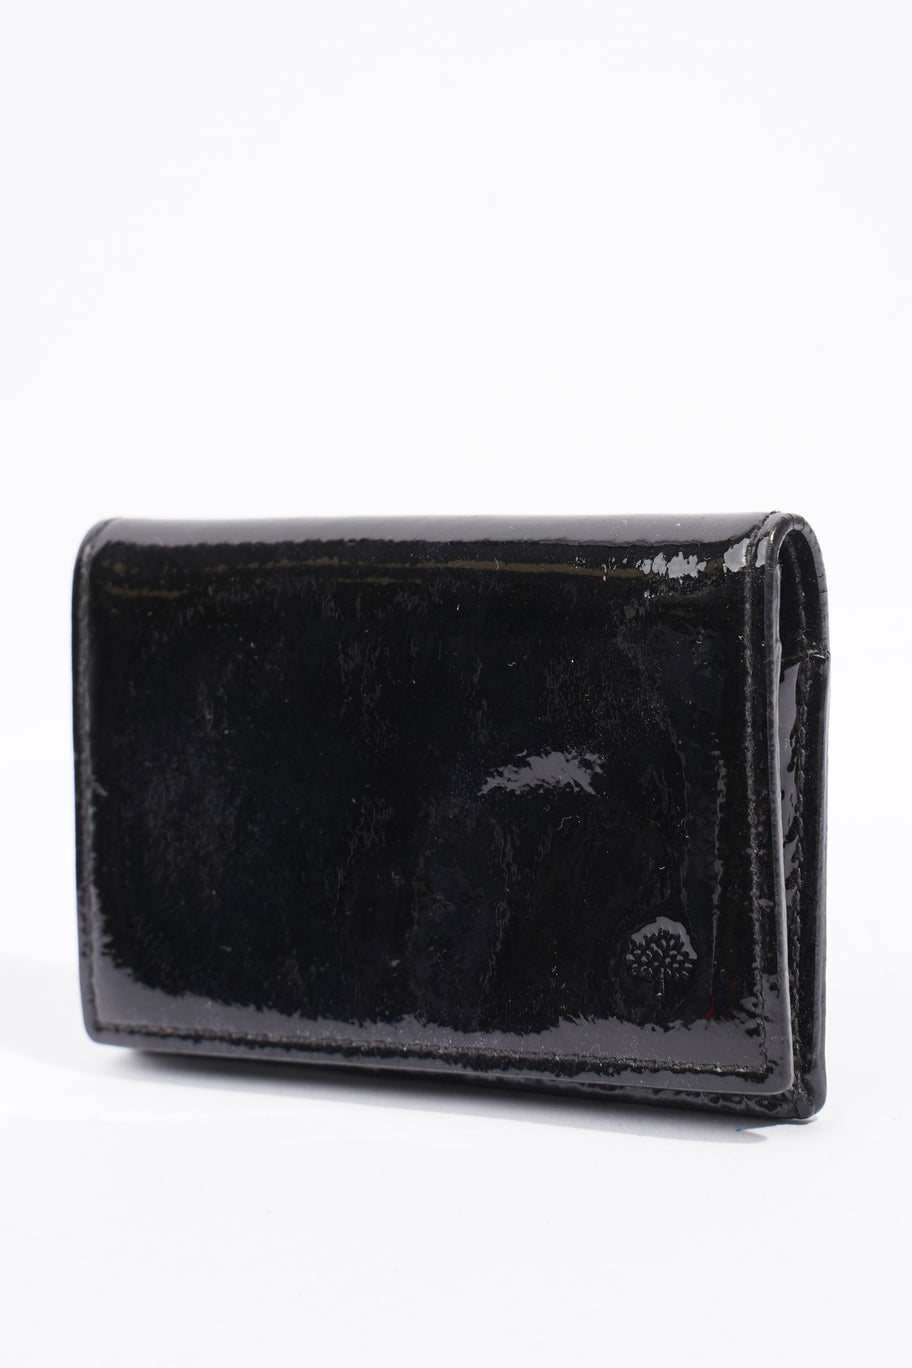 Coin Wallet Black Patent Leather Image 2